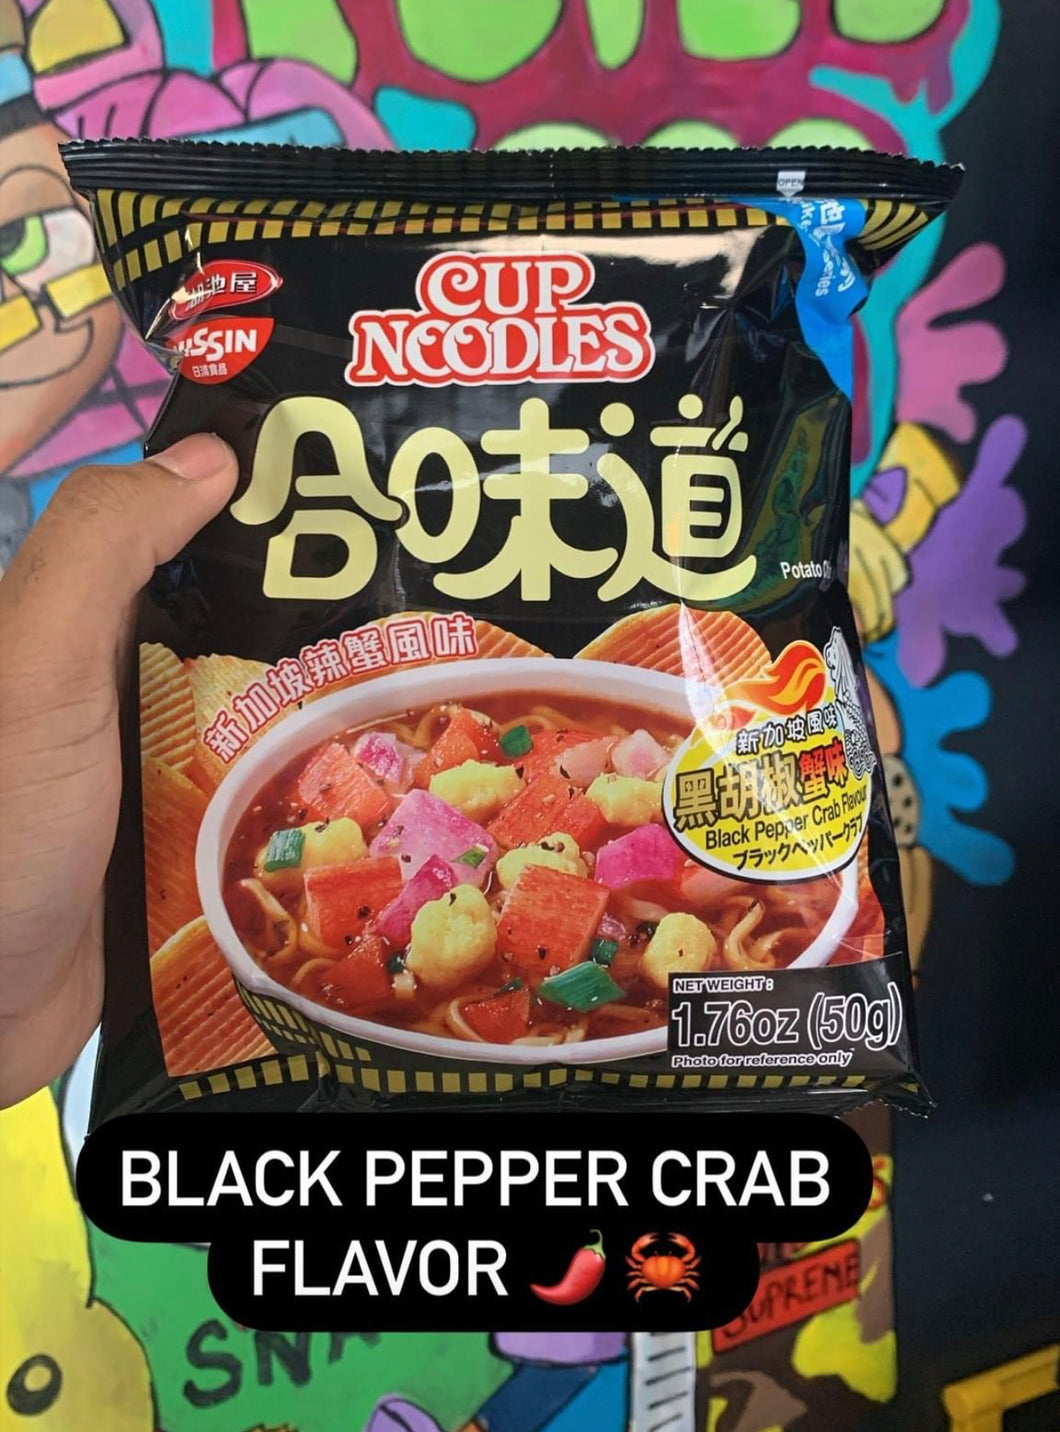 Black Pepper Crab & Spicy Seafood Flavor by Cup Noodles